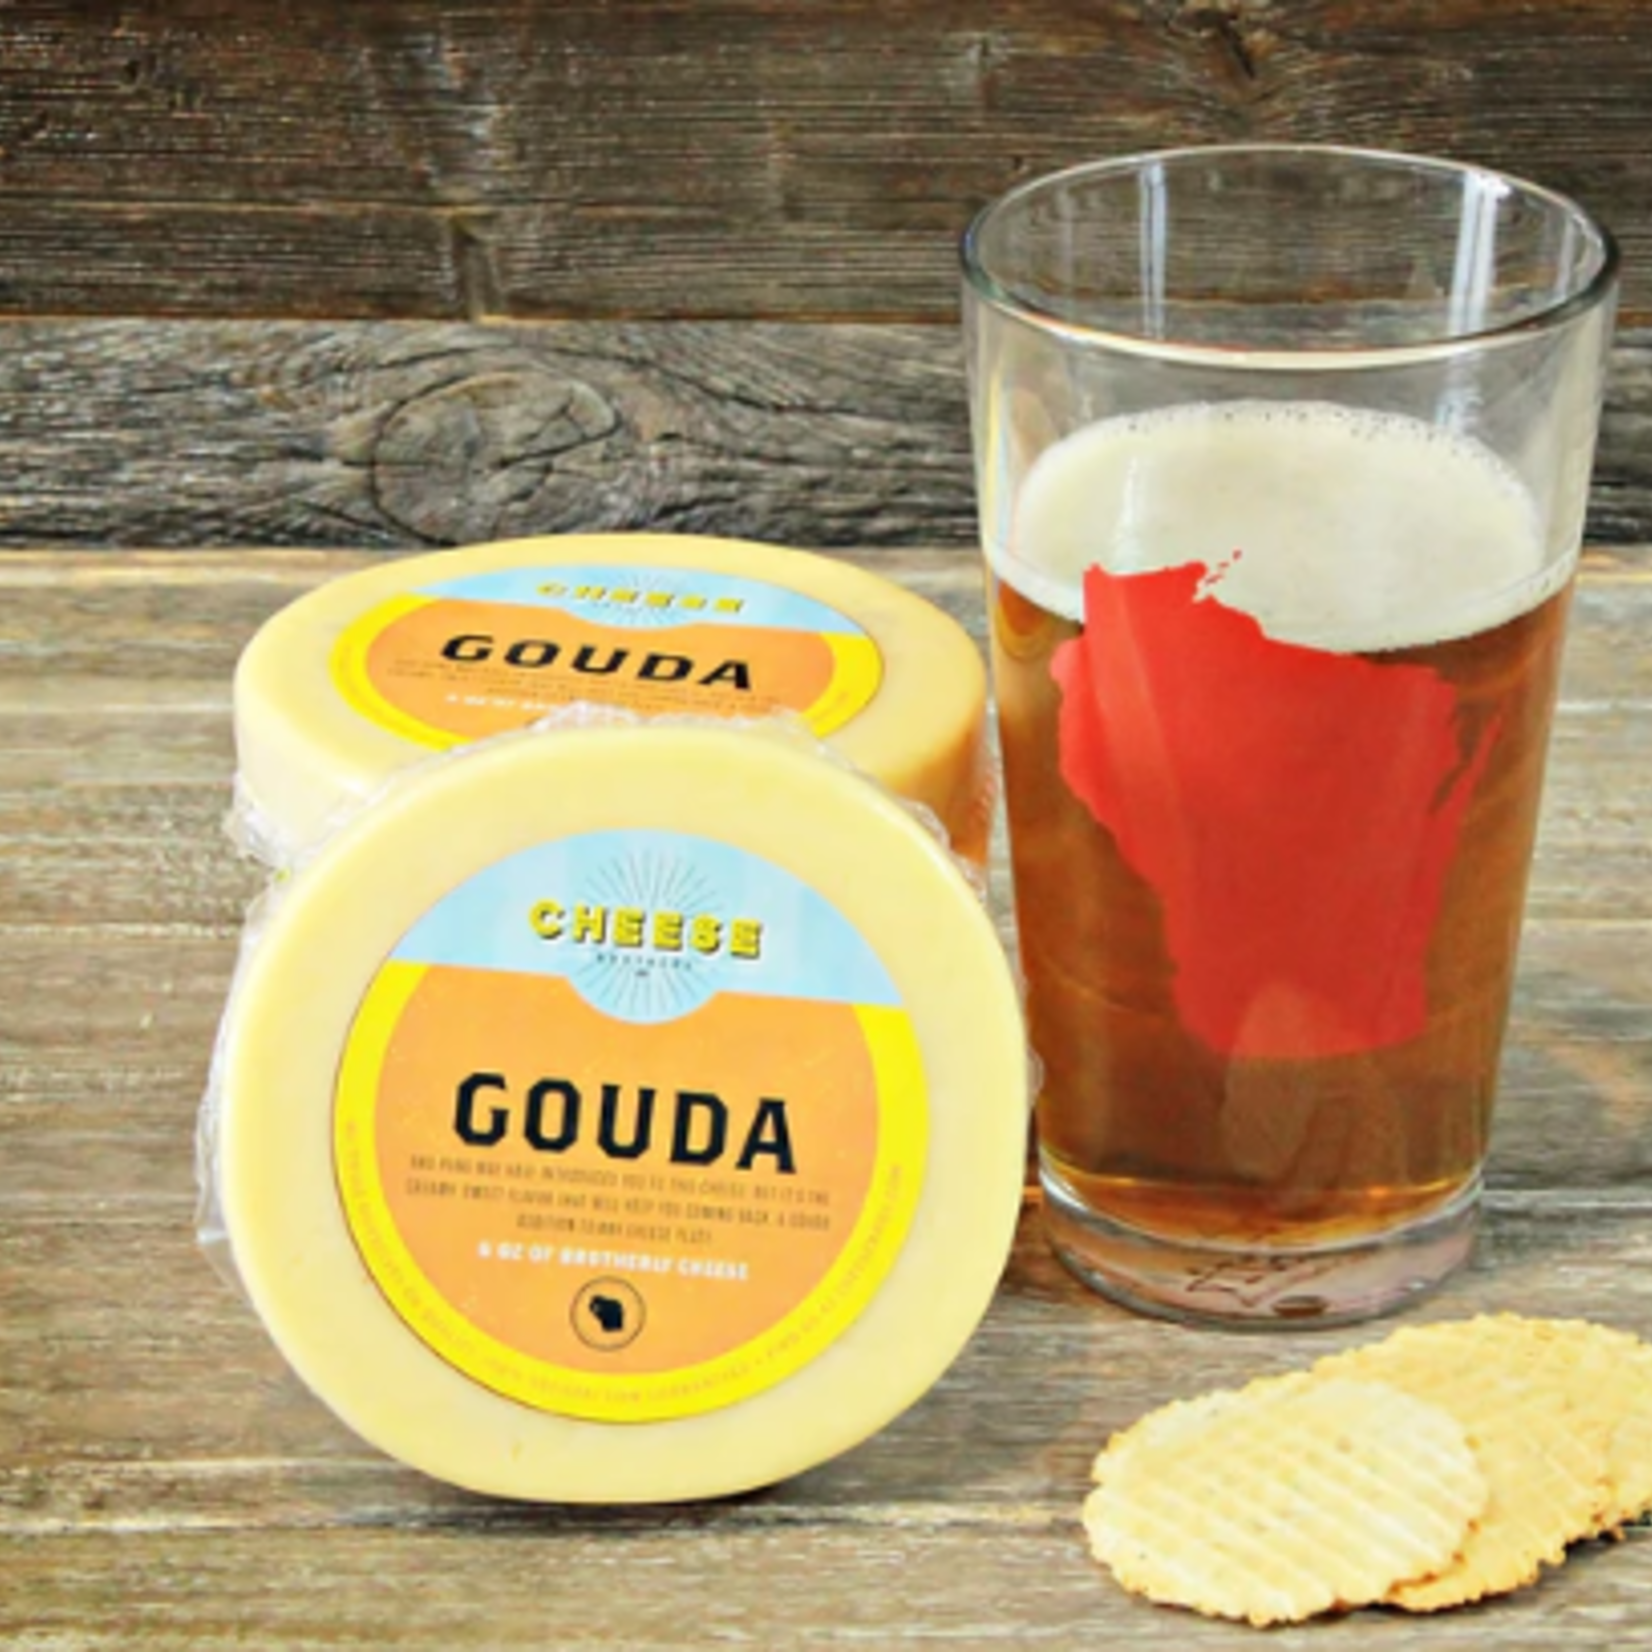 Cheese Brothers Gouda 6oz.